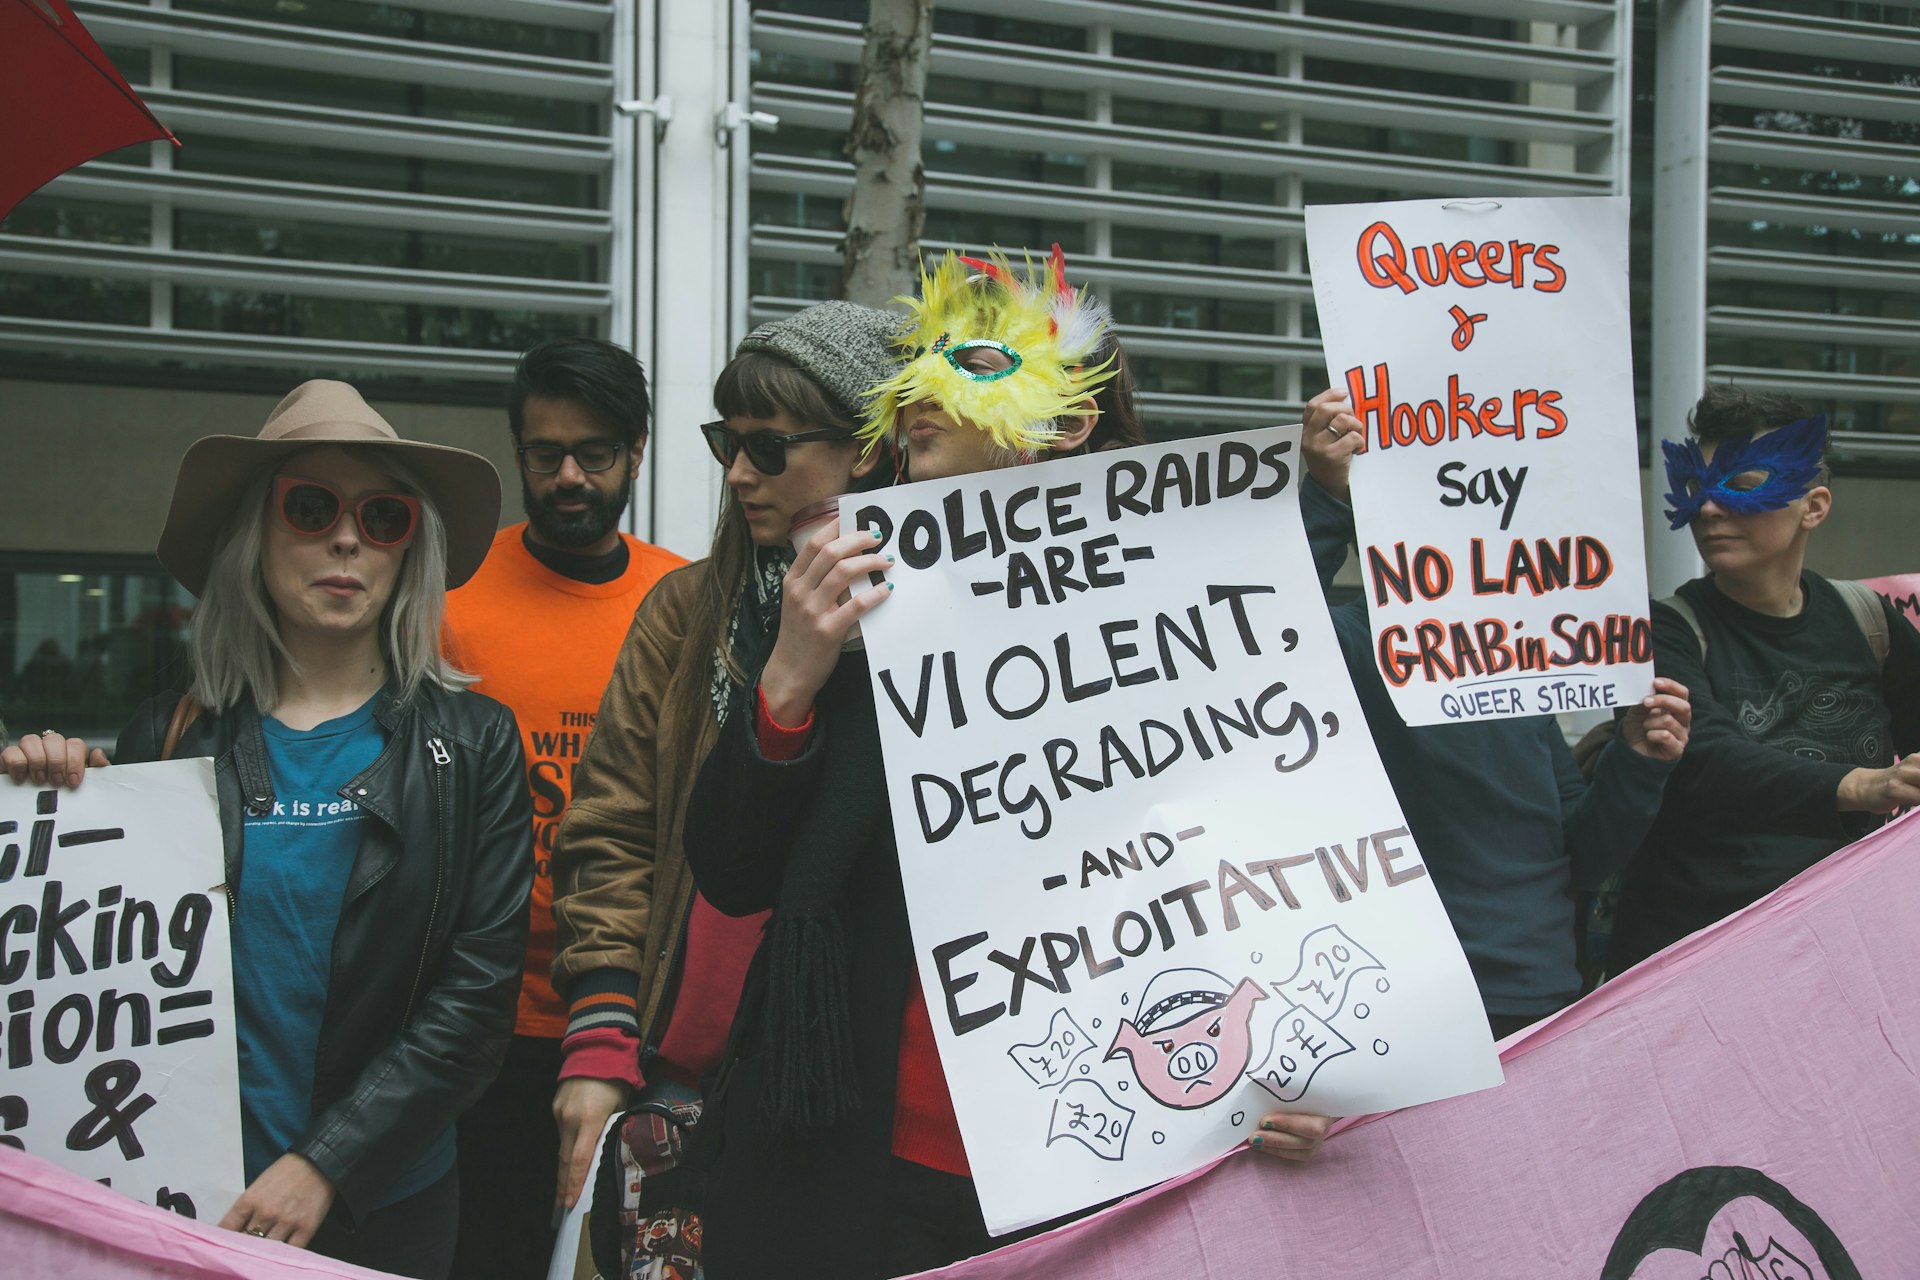 We don't need saving: London sex workers demand an end to racist police raids